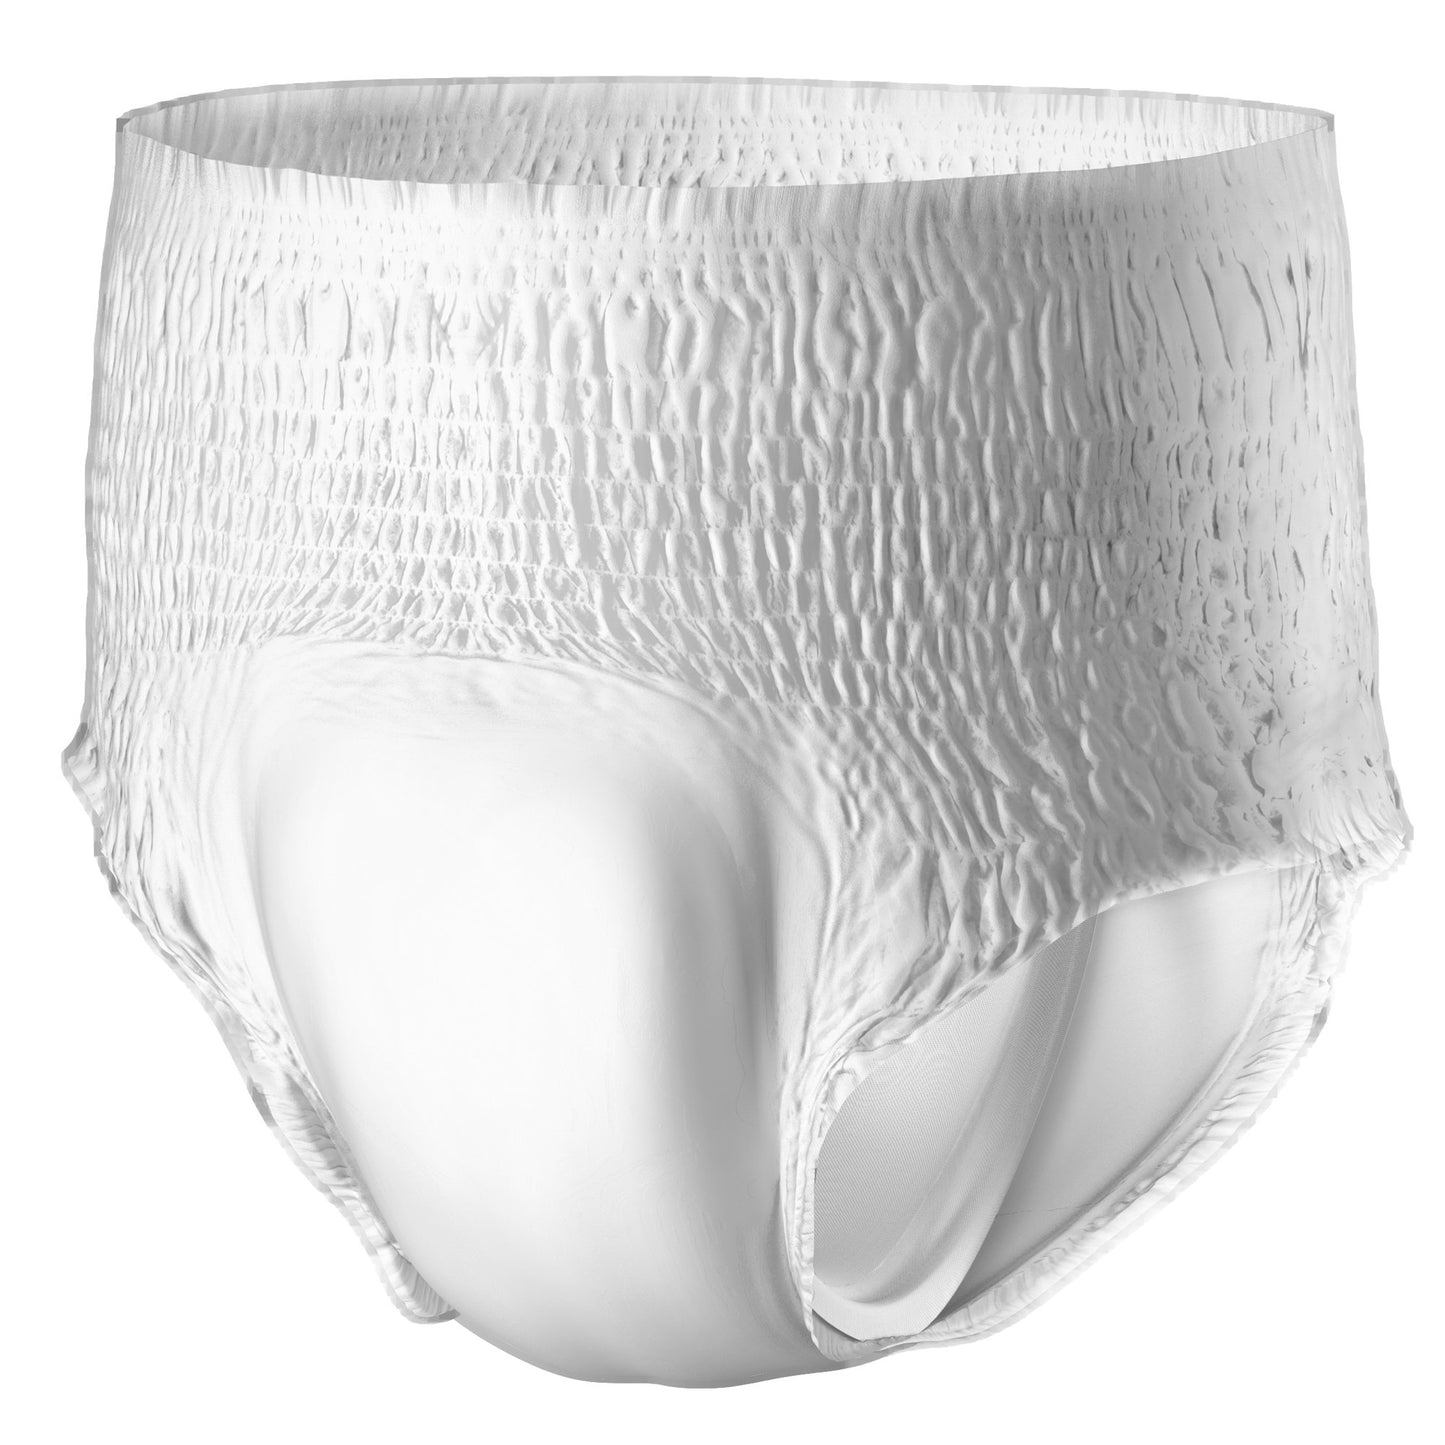 Prevail® Maximum Absorbent Underwear, Extra Large, 56 ct